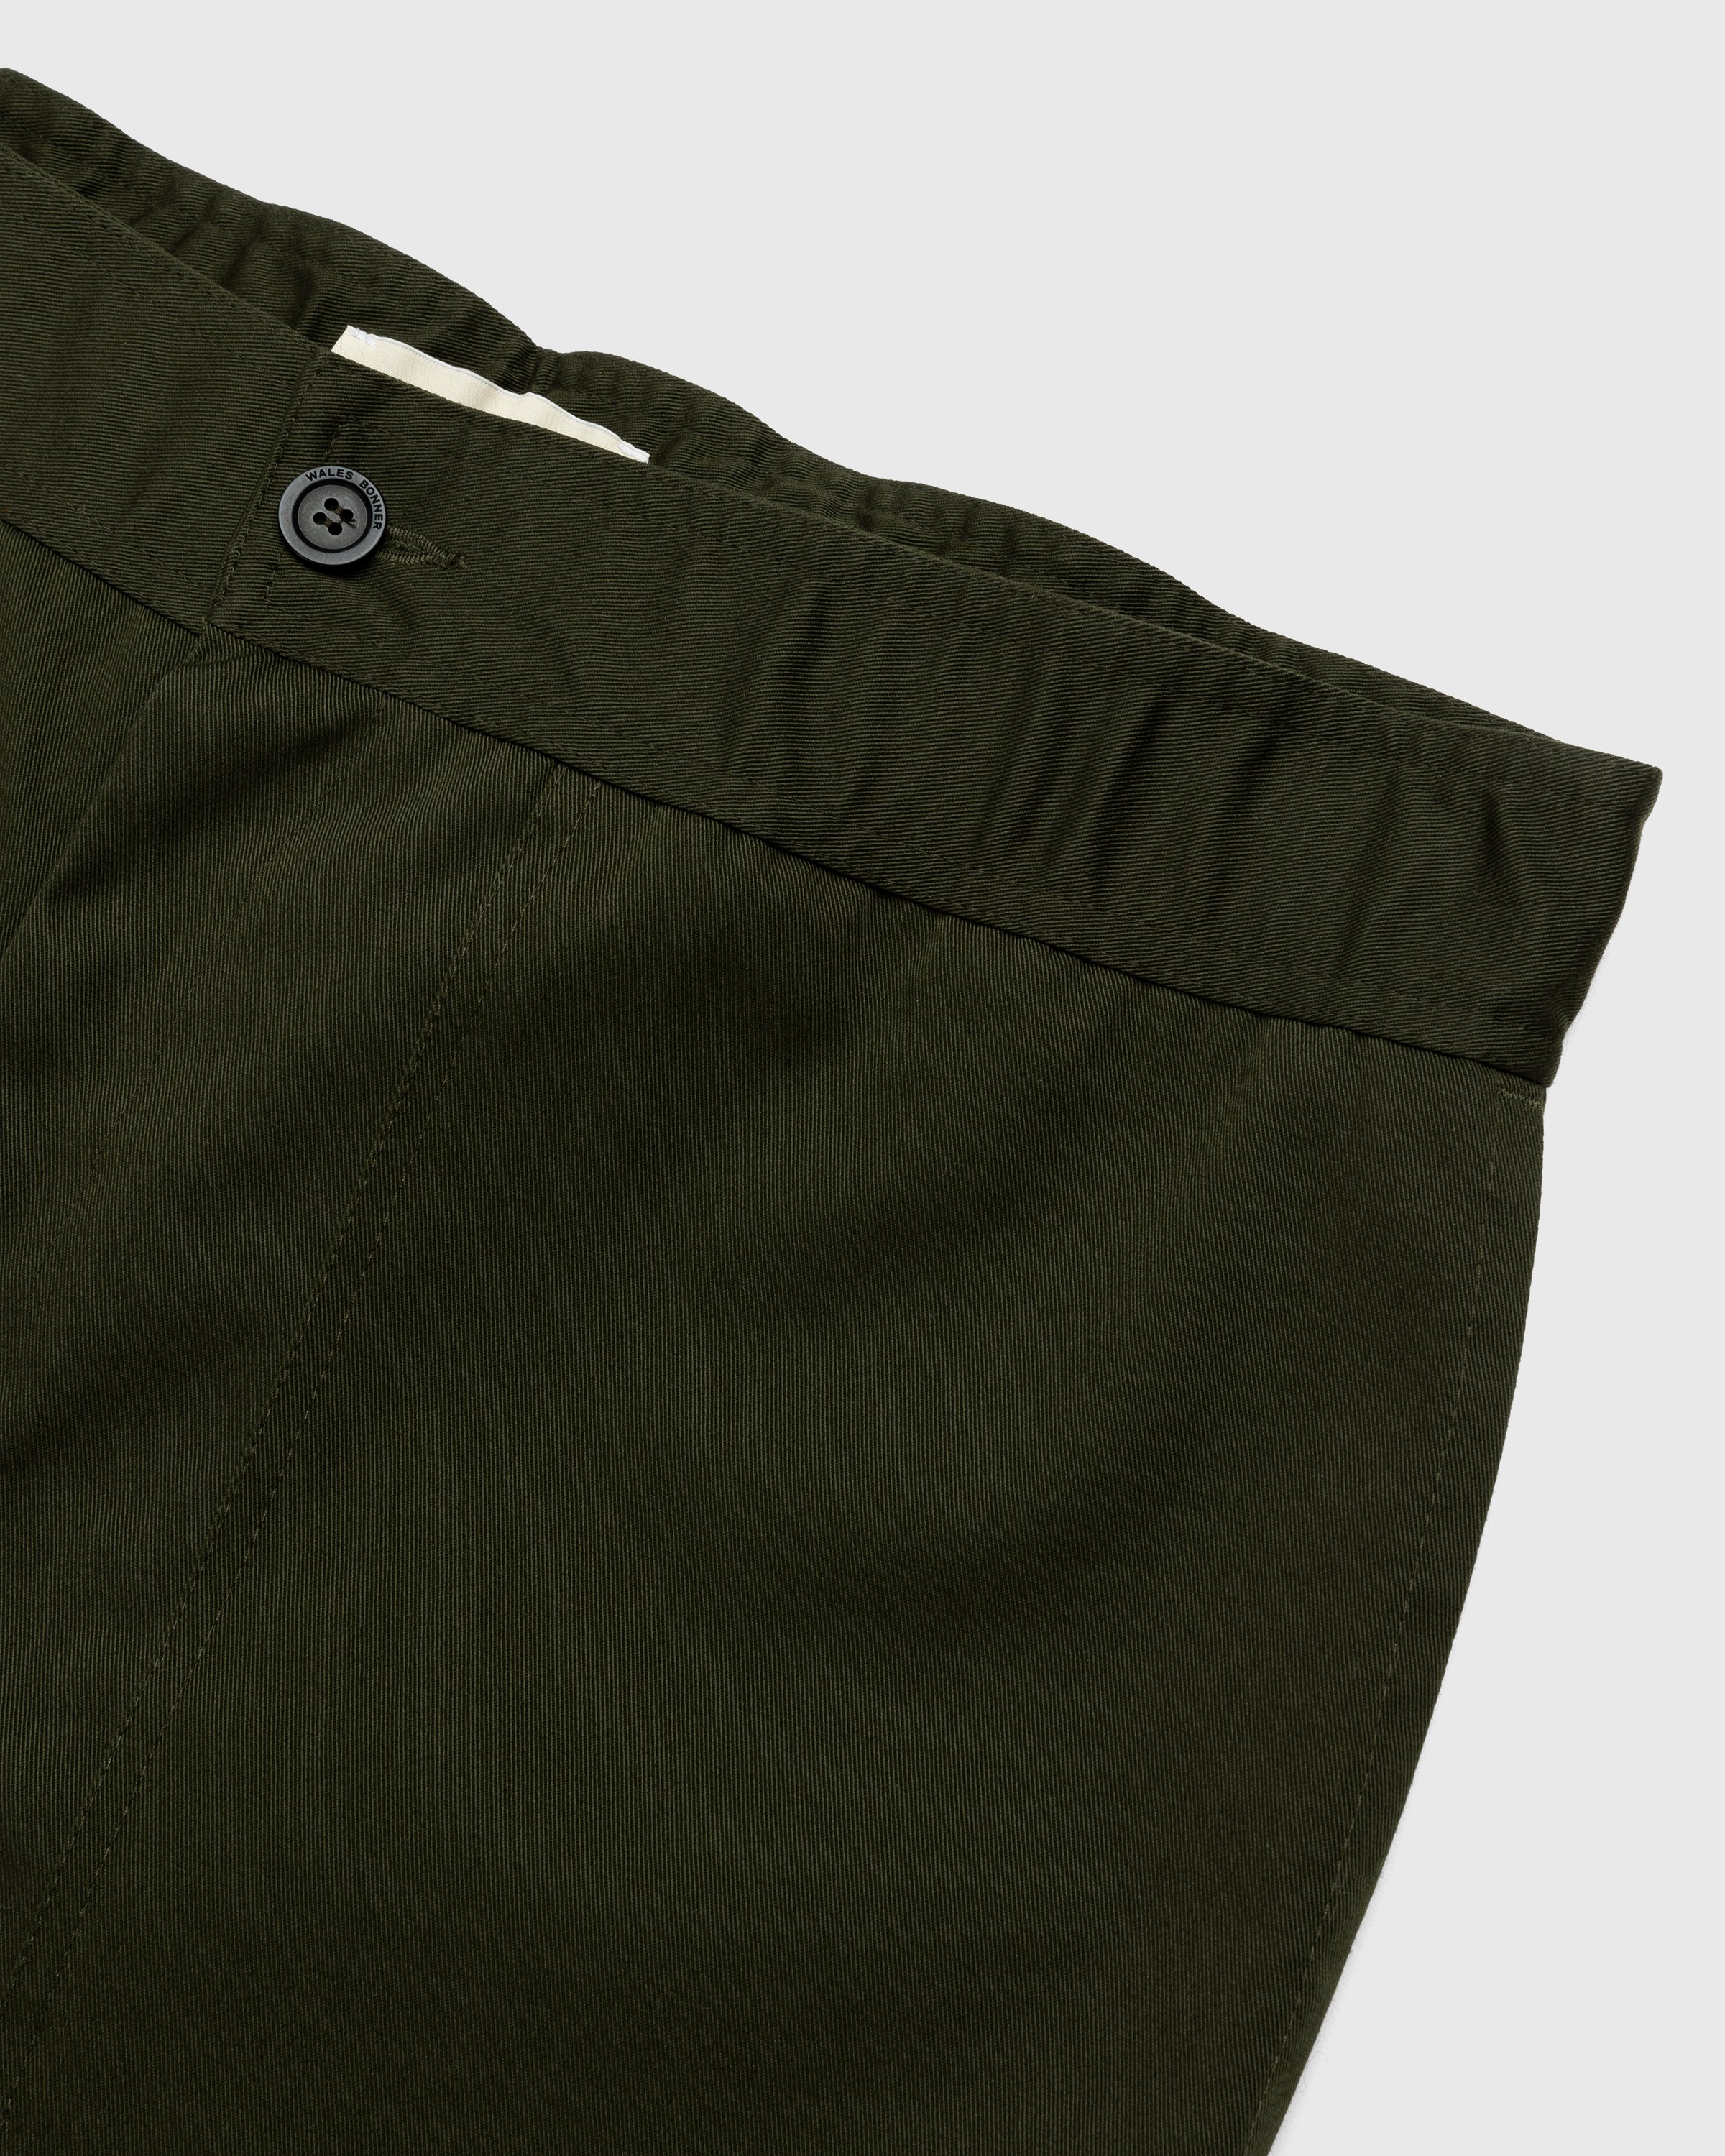 Wales Bonner - Earth Trousers Green - Clothing - Green - Image 3